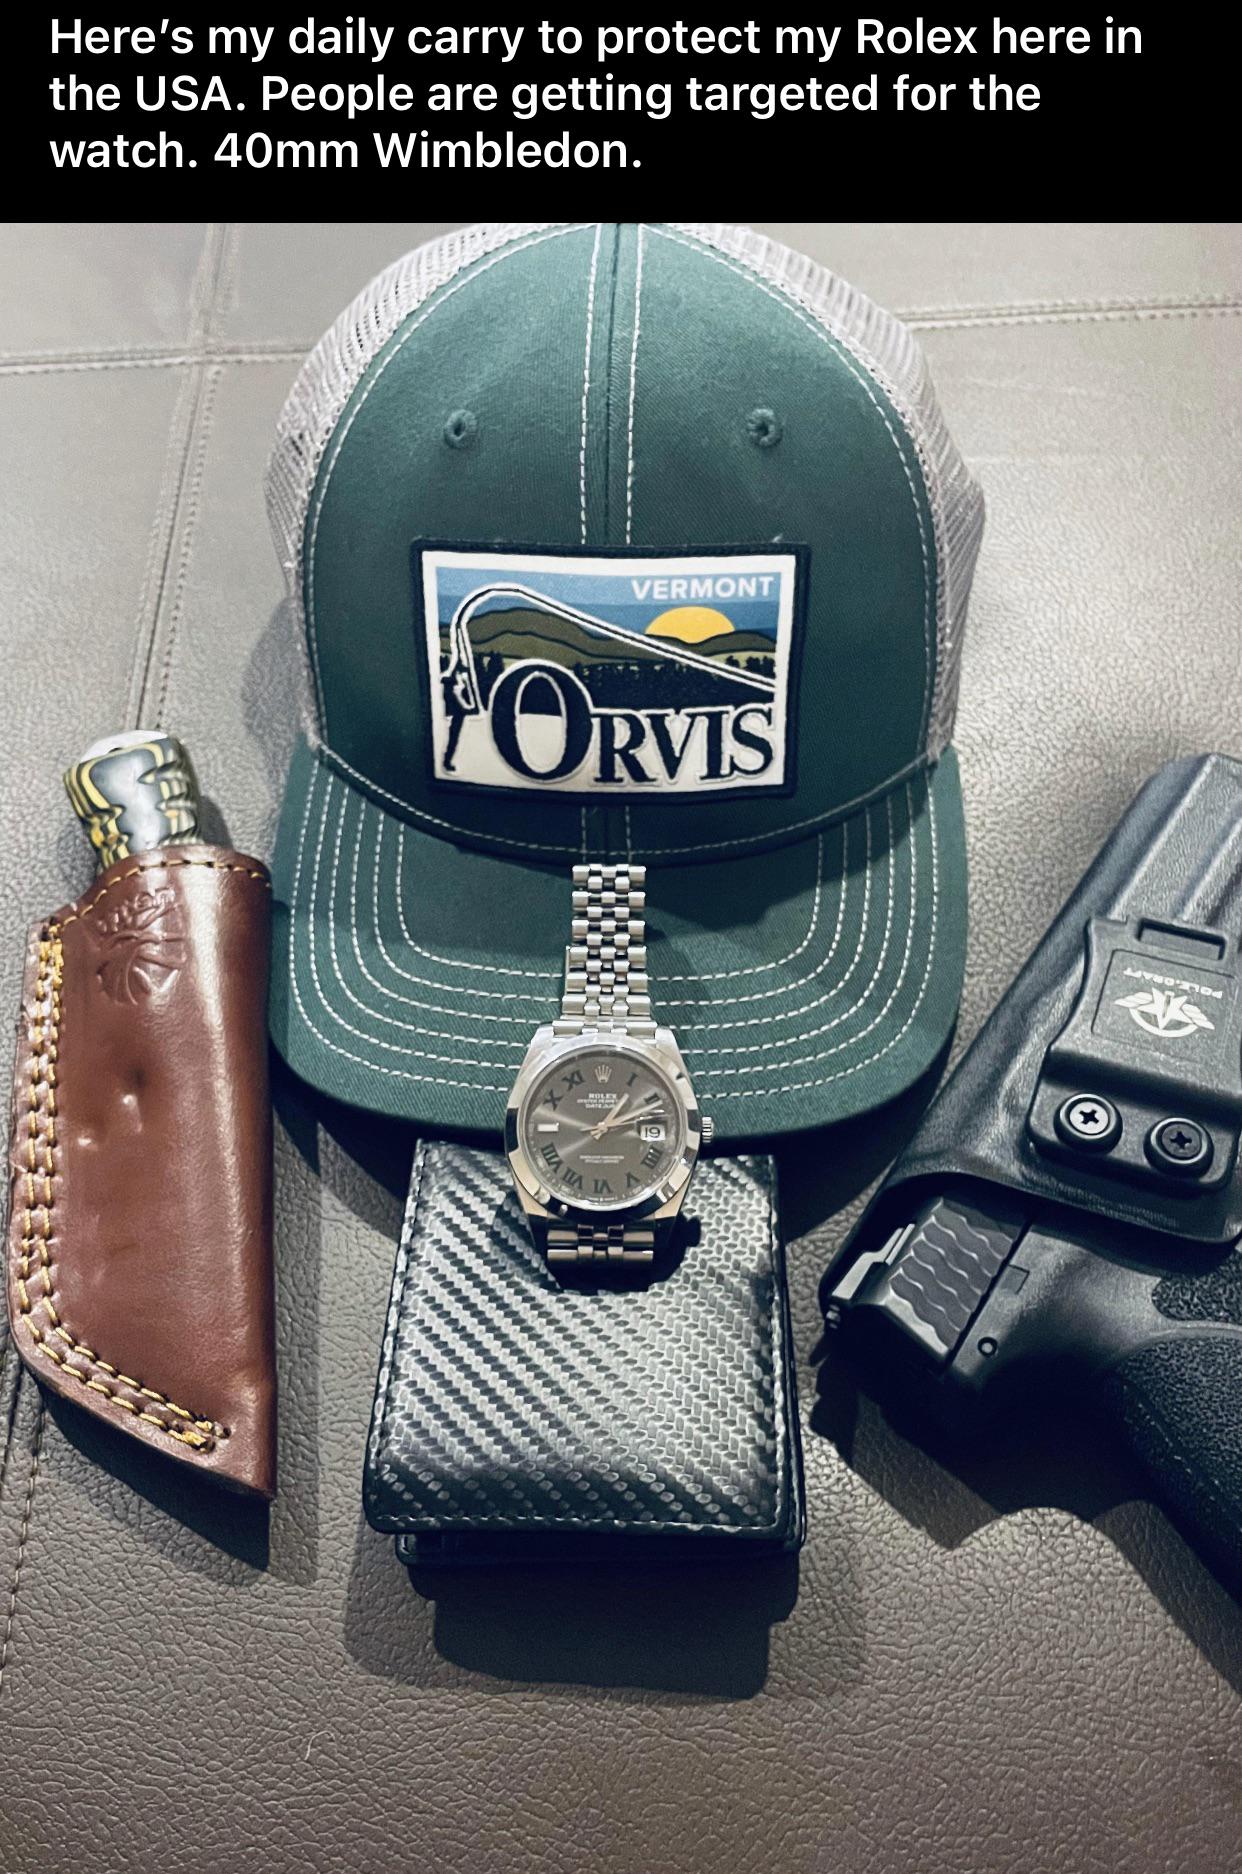 internet badasses -- rolex meme - Here's my daily carry to protect my Rolex here in the Usa. People are getting targeted for the watch. 40mm Wimbledon. Vermont Orvis Vod We 19 Ia